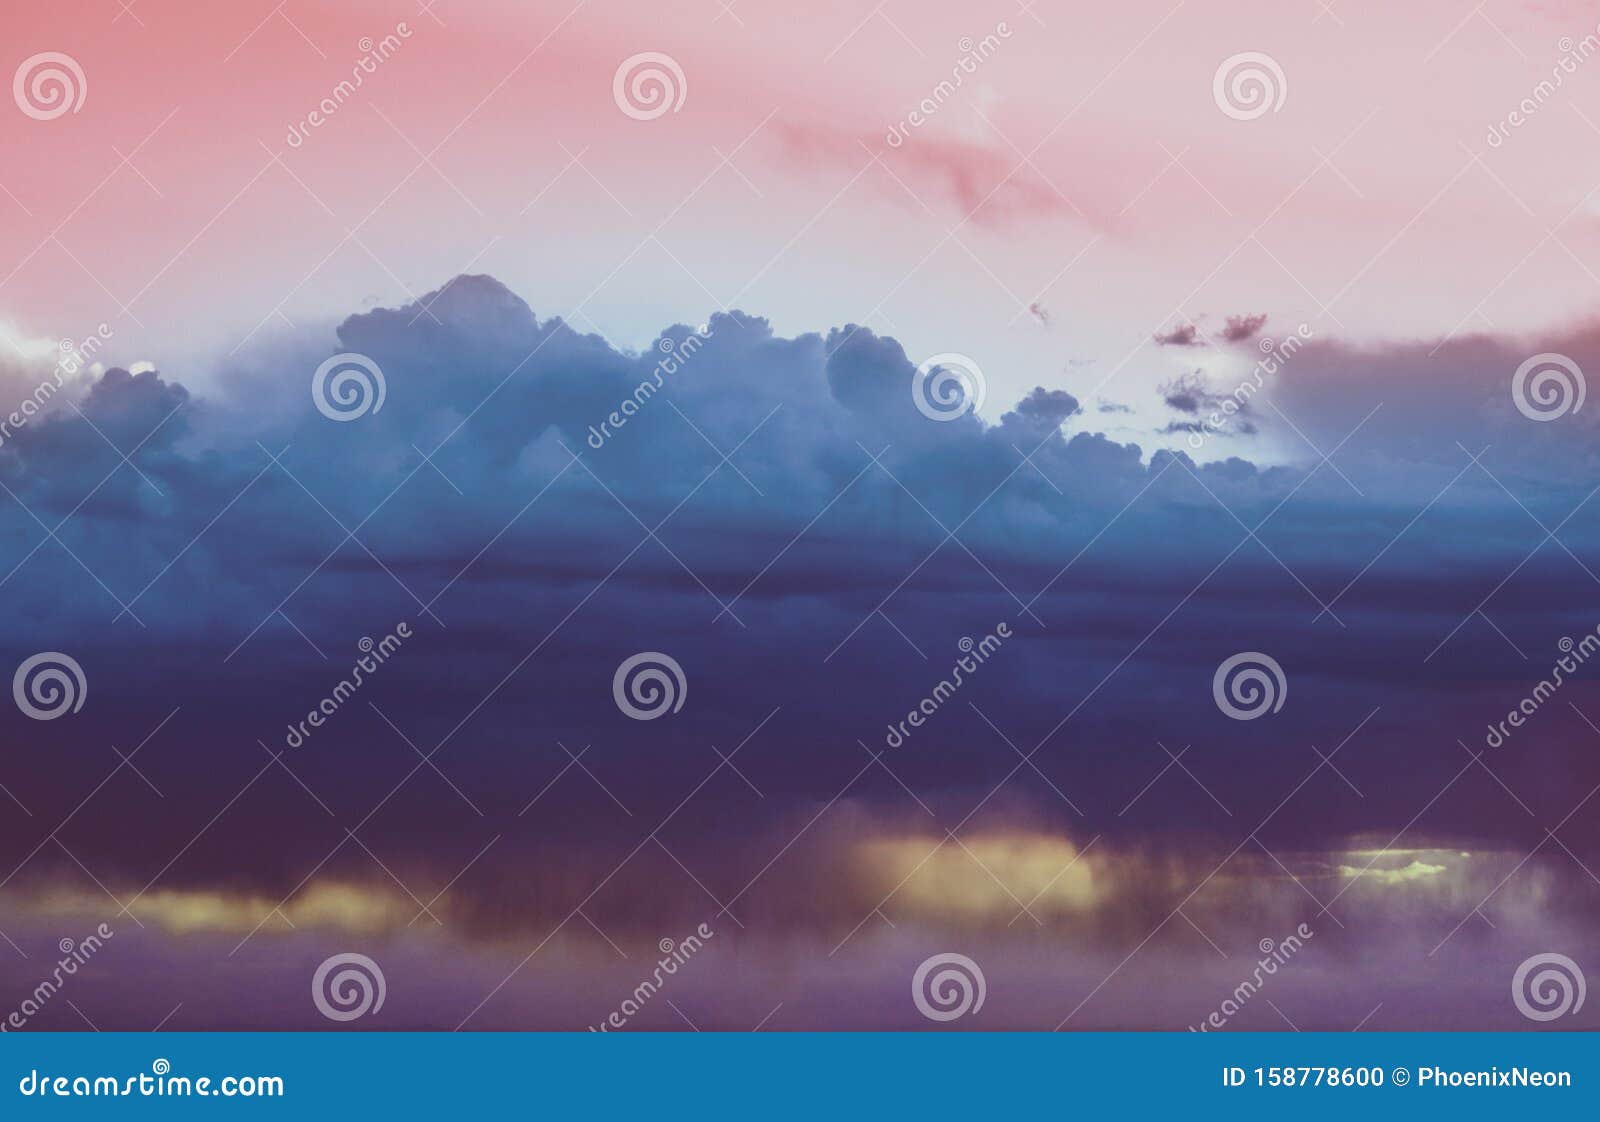 Beautiful Dramatic Sky With Rain Clouds Landscape Stock Illustration Illustration Of Nature Lilac